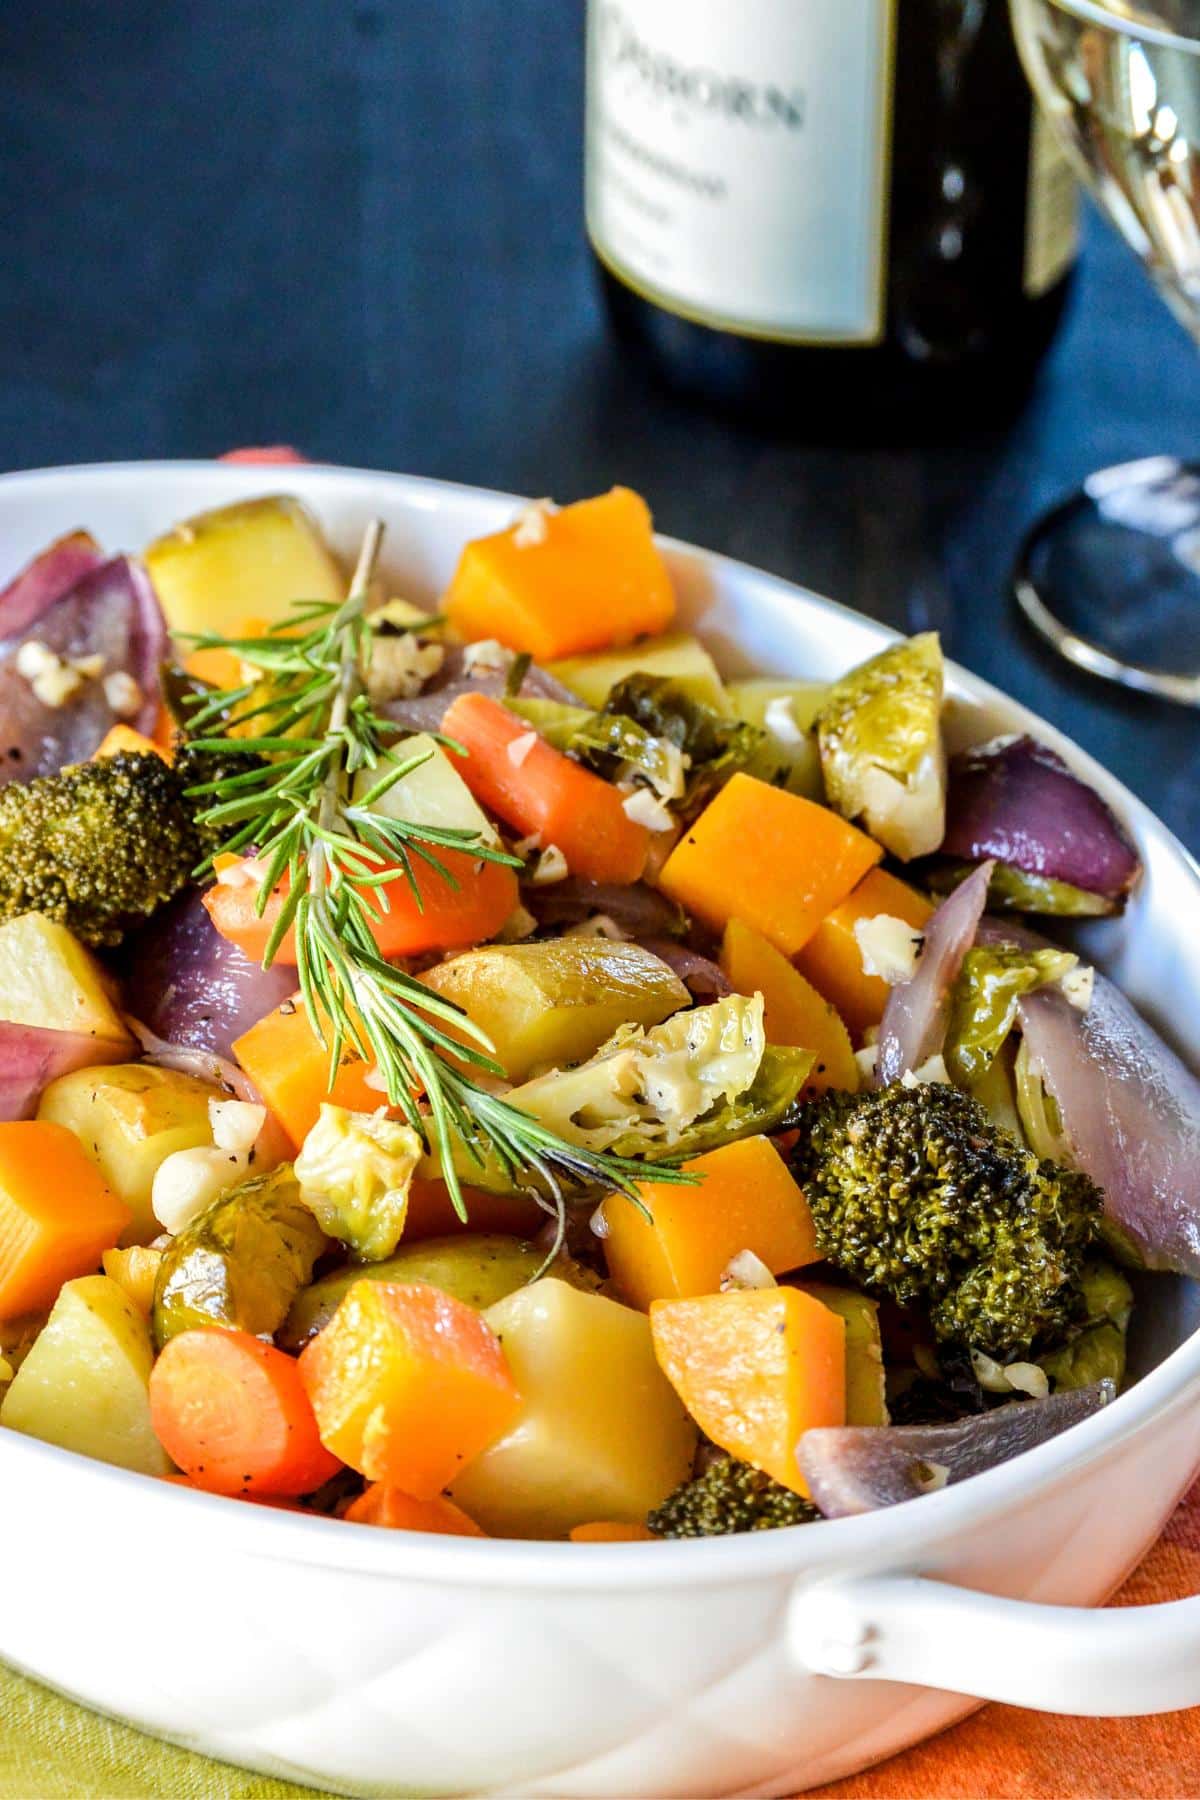 Dish of roasted vegetables next to a bottle of white wine.